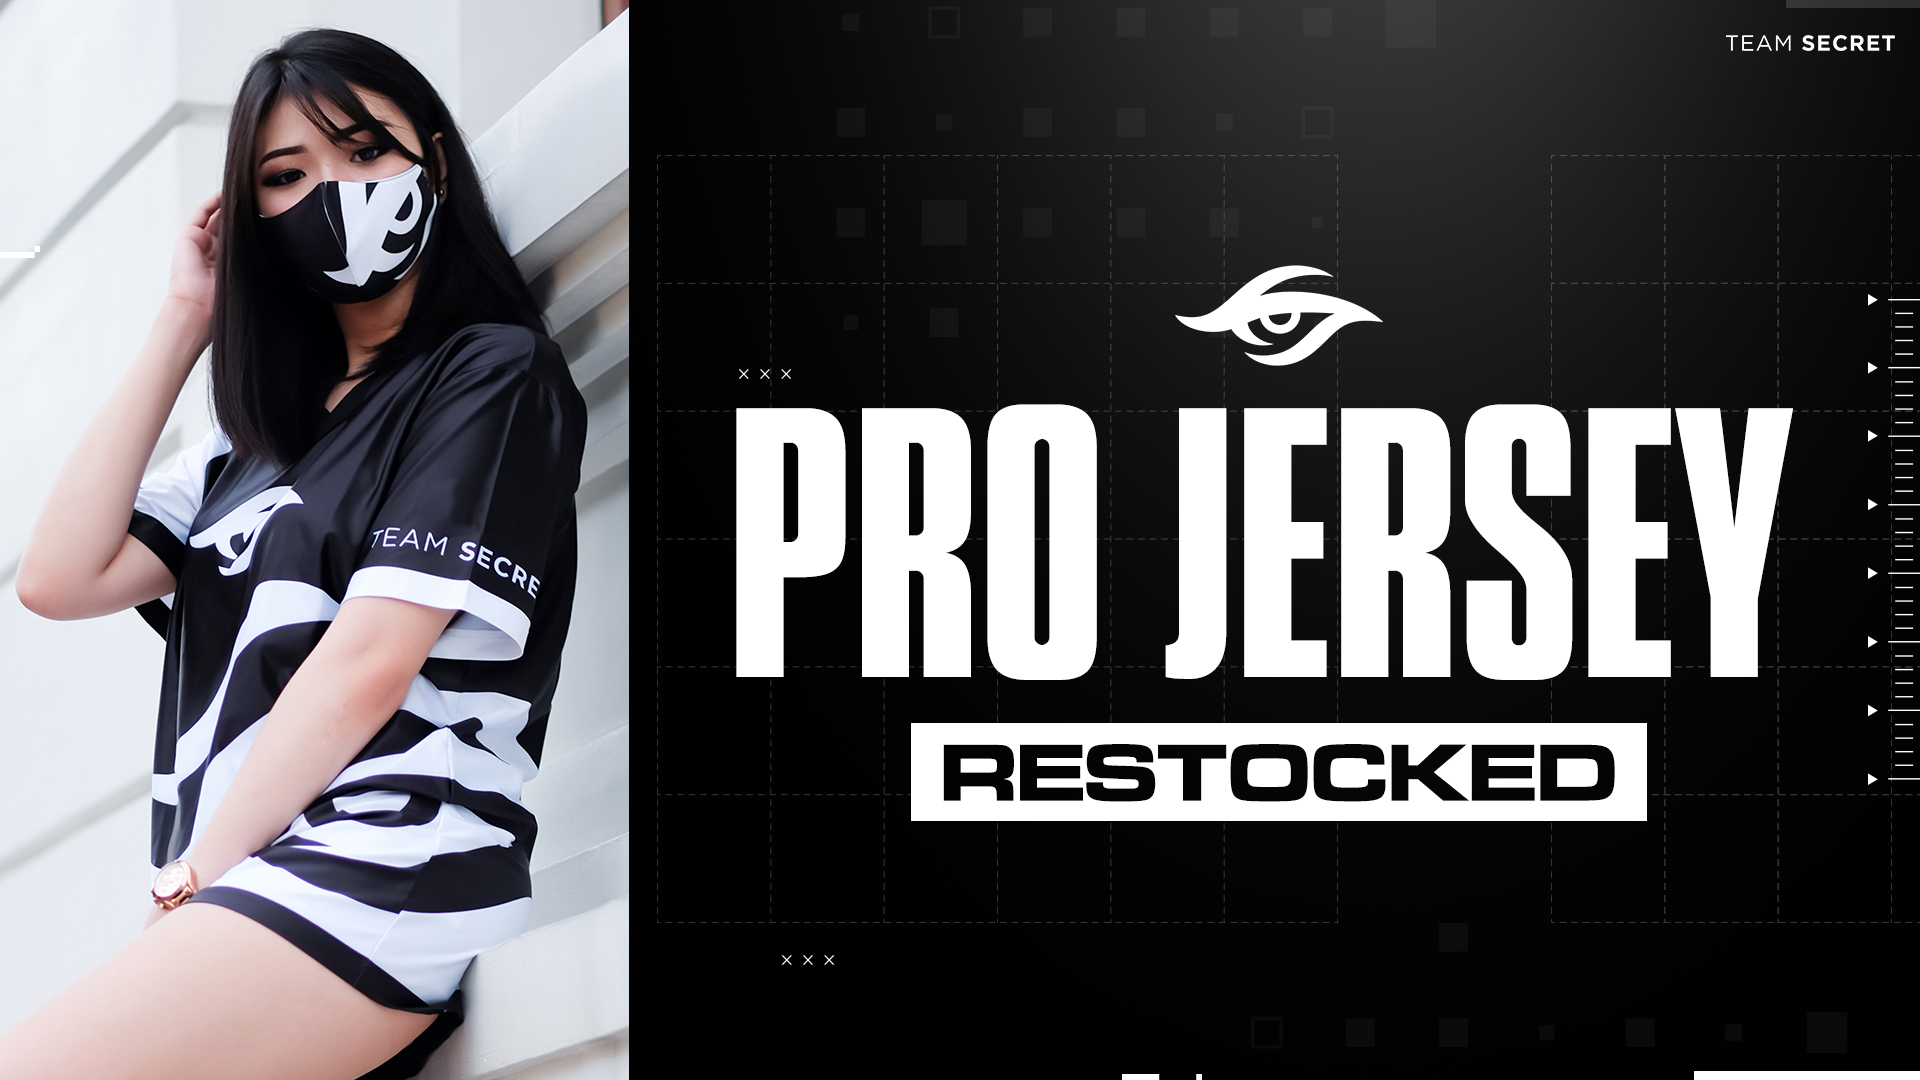 Team secret on the official team secret pro jersey is back in stock get it while you can ð ð httpstcougrofdtr httpstcospirjegxhb